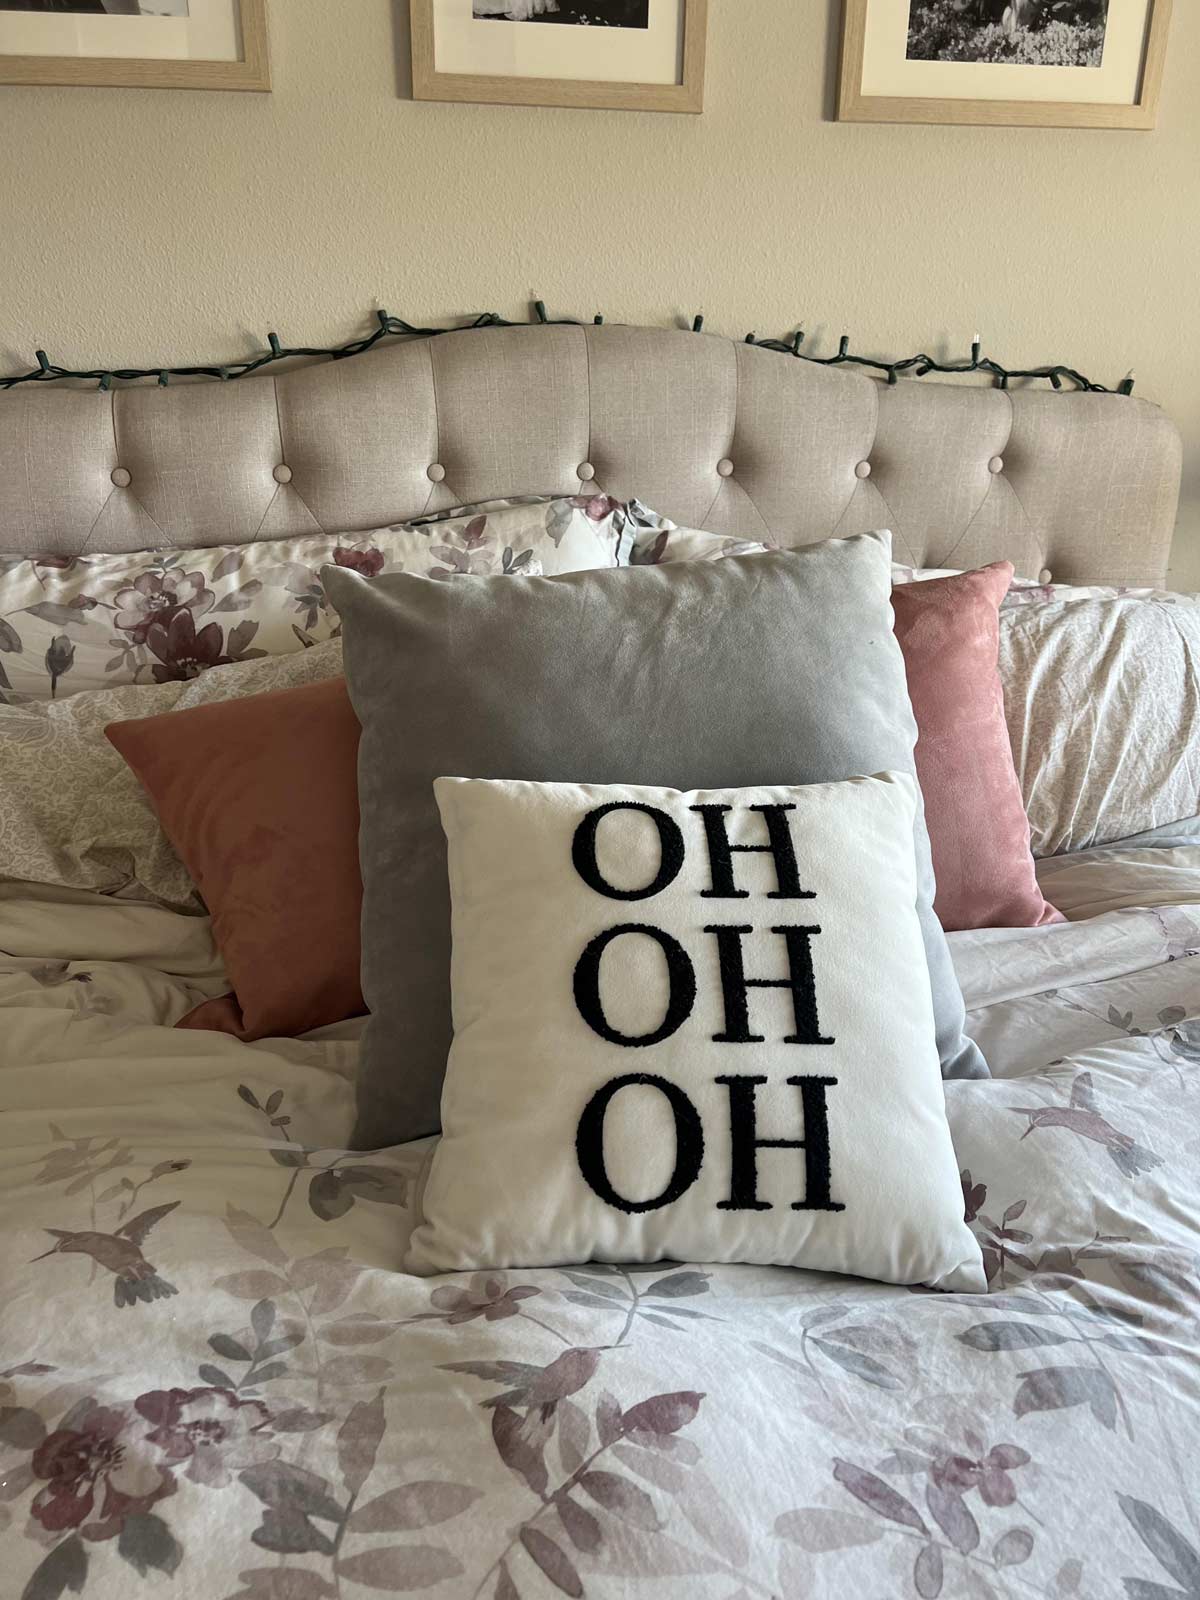 My Christmas pillow doubles as Valentine's Day decor